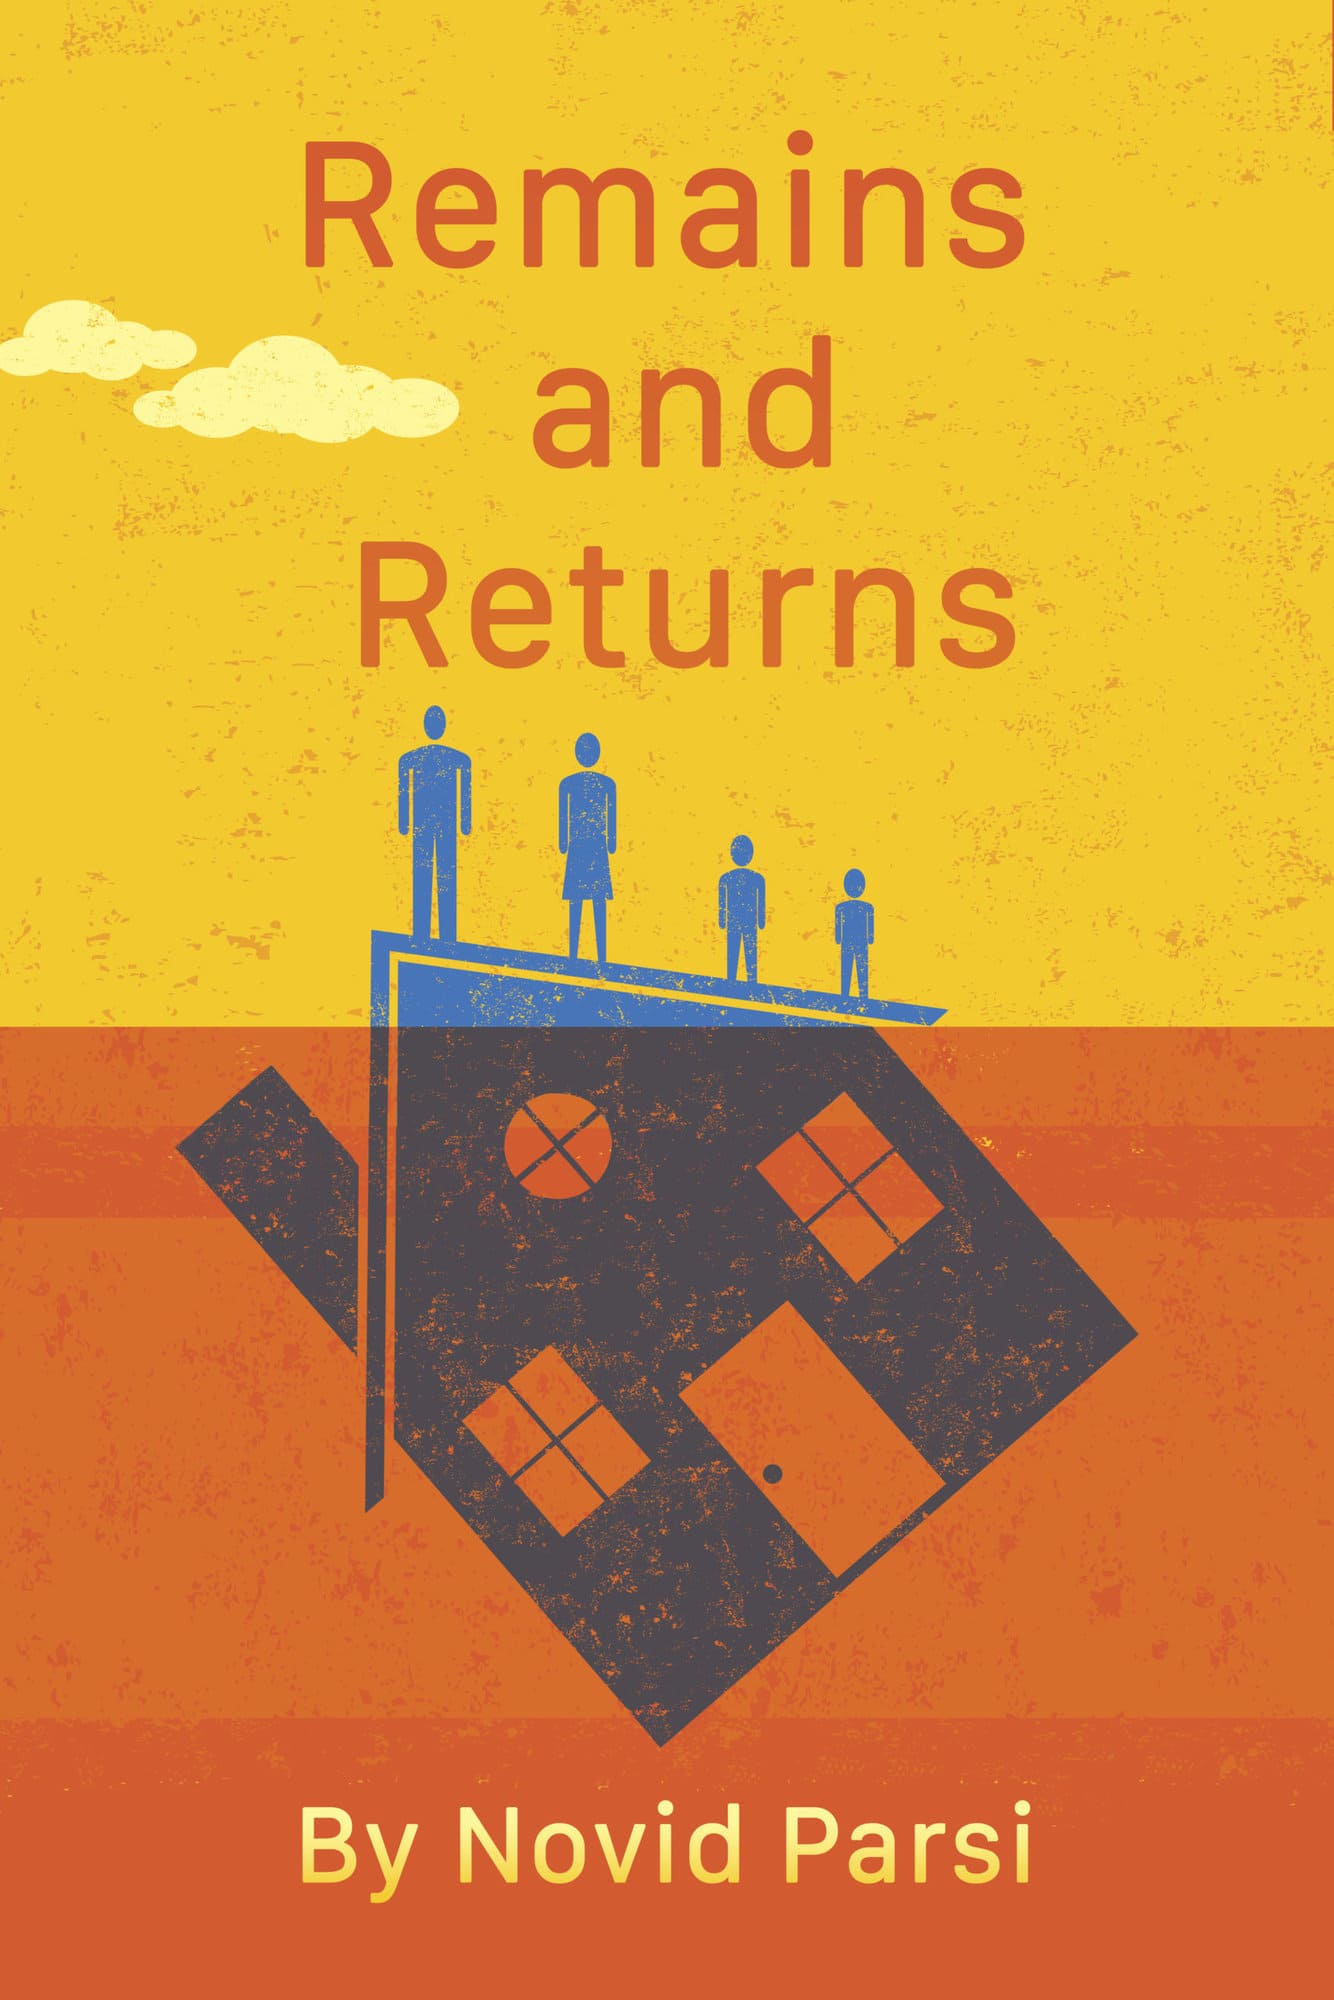 Remains and Returns by Novid Parsi Ashland New Plays Festival